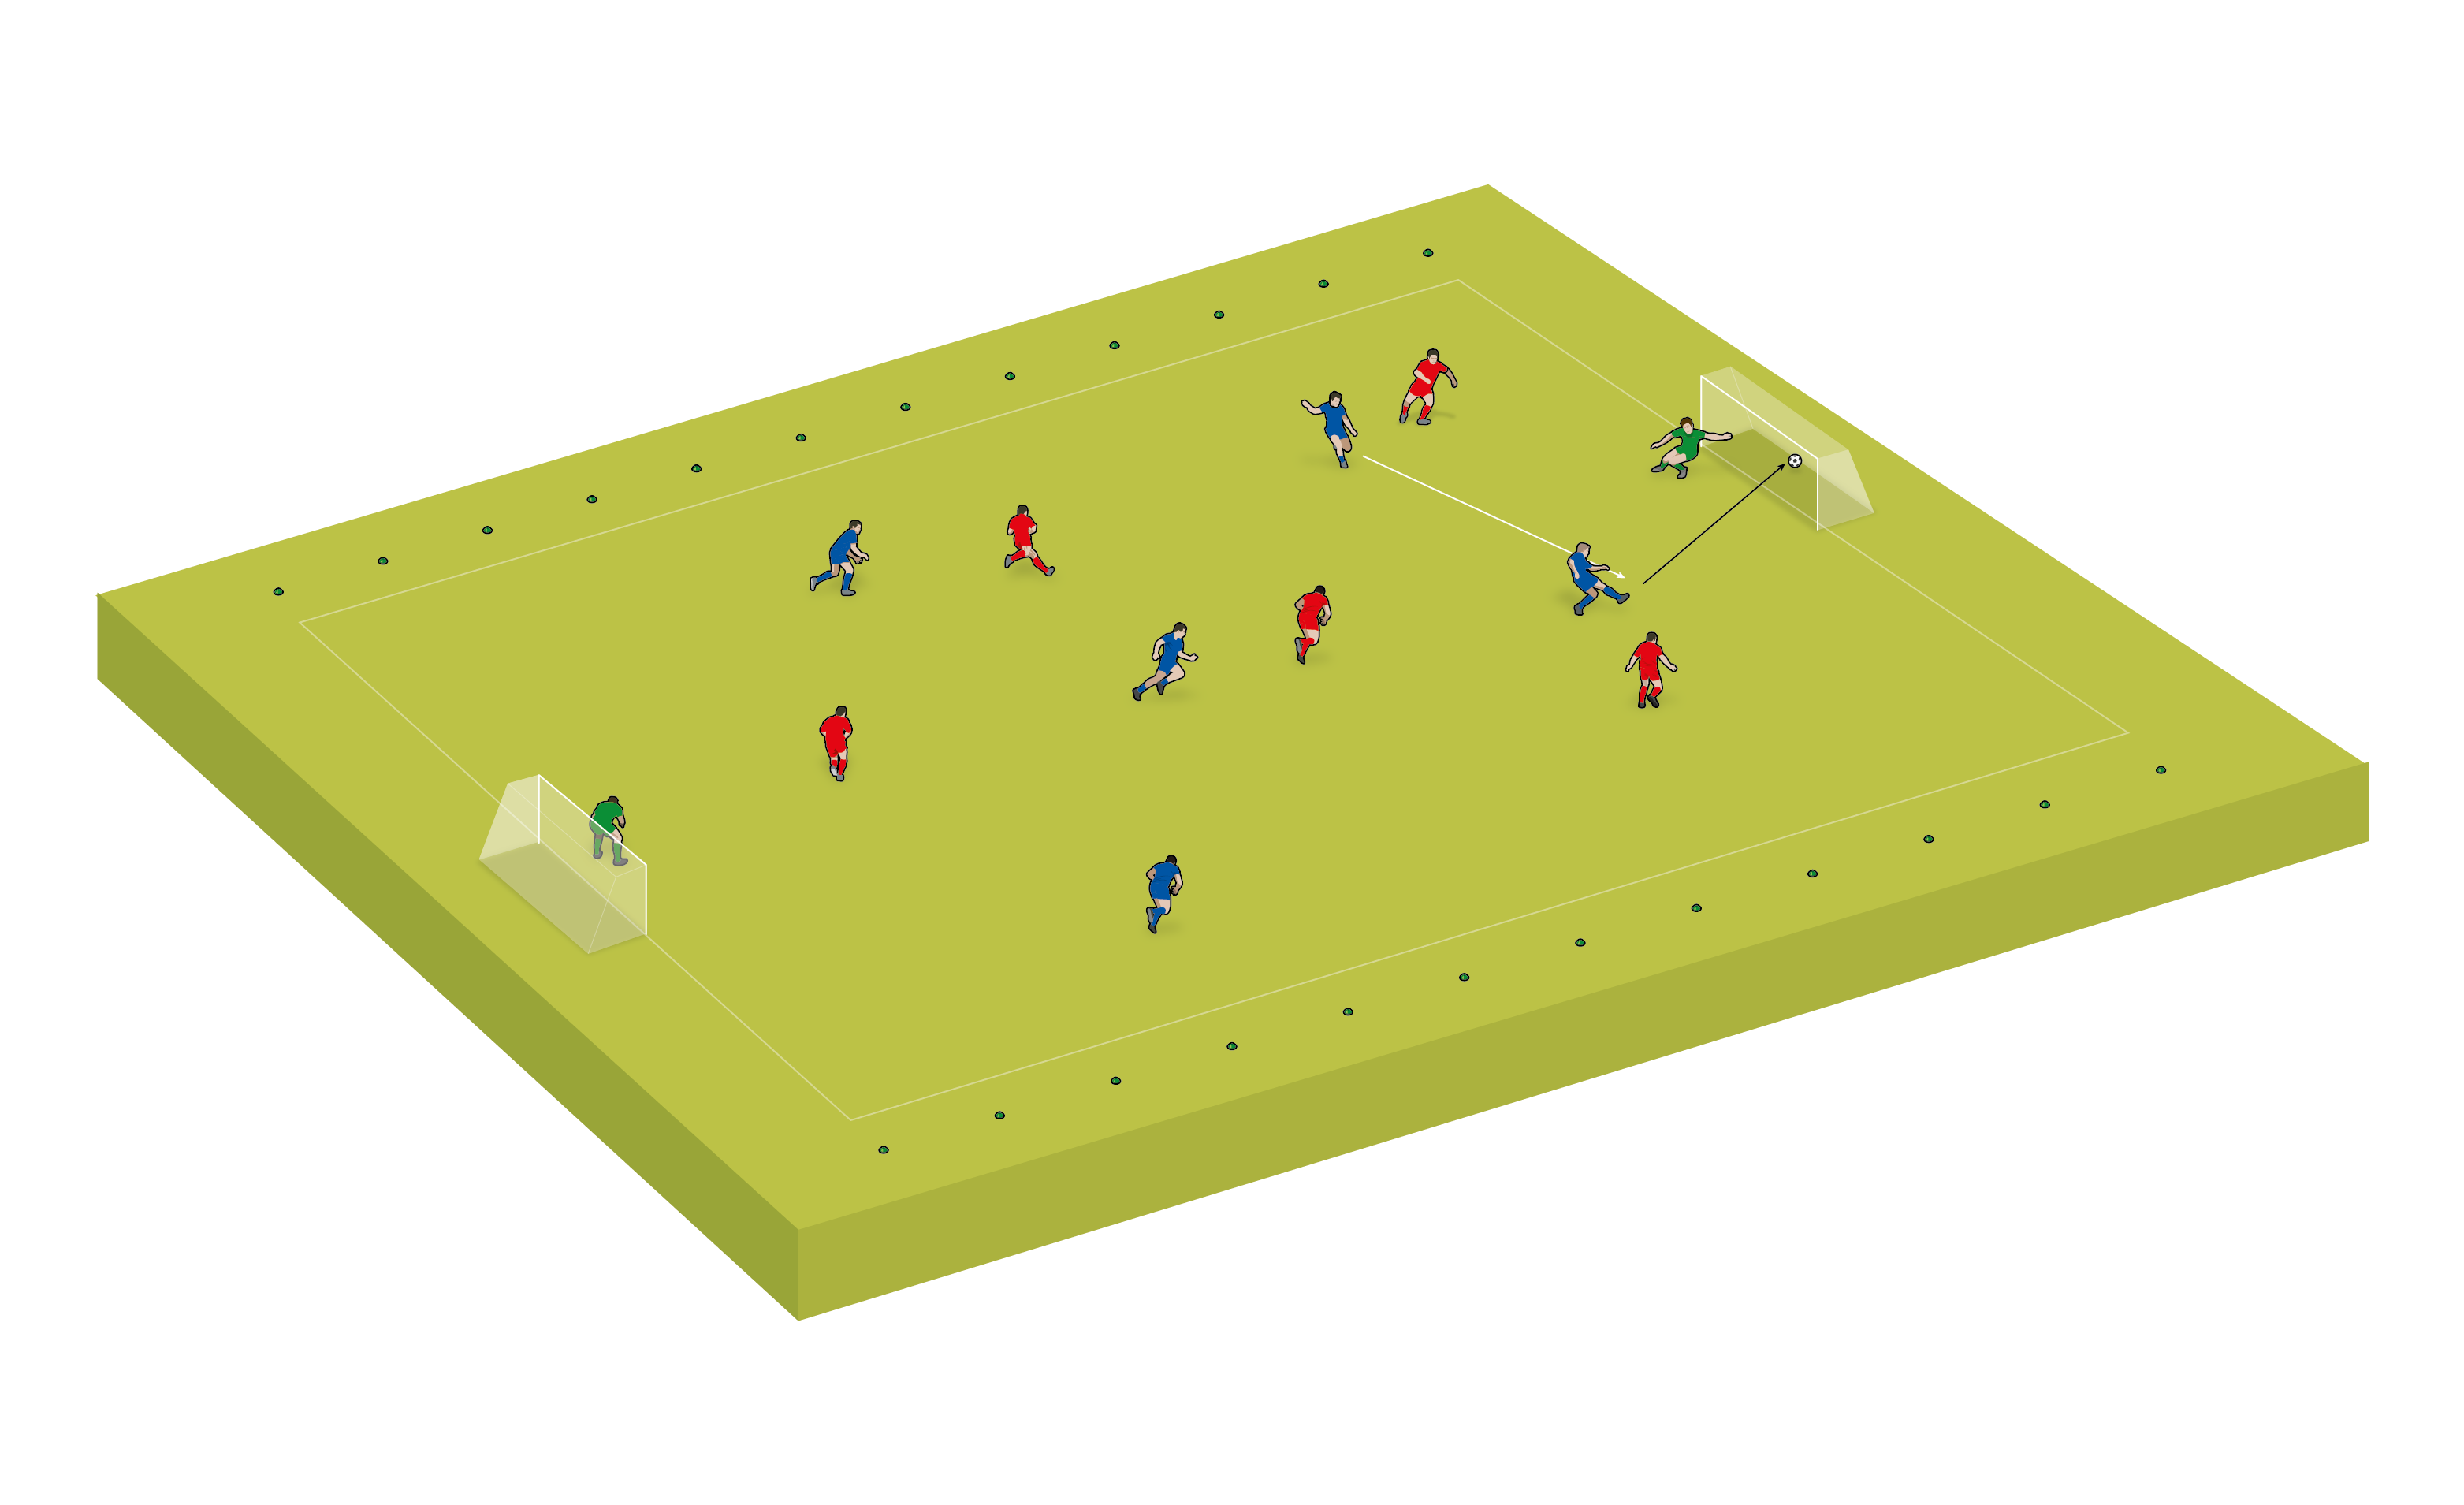 Small-sided game: Changing course